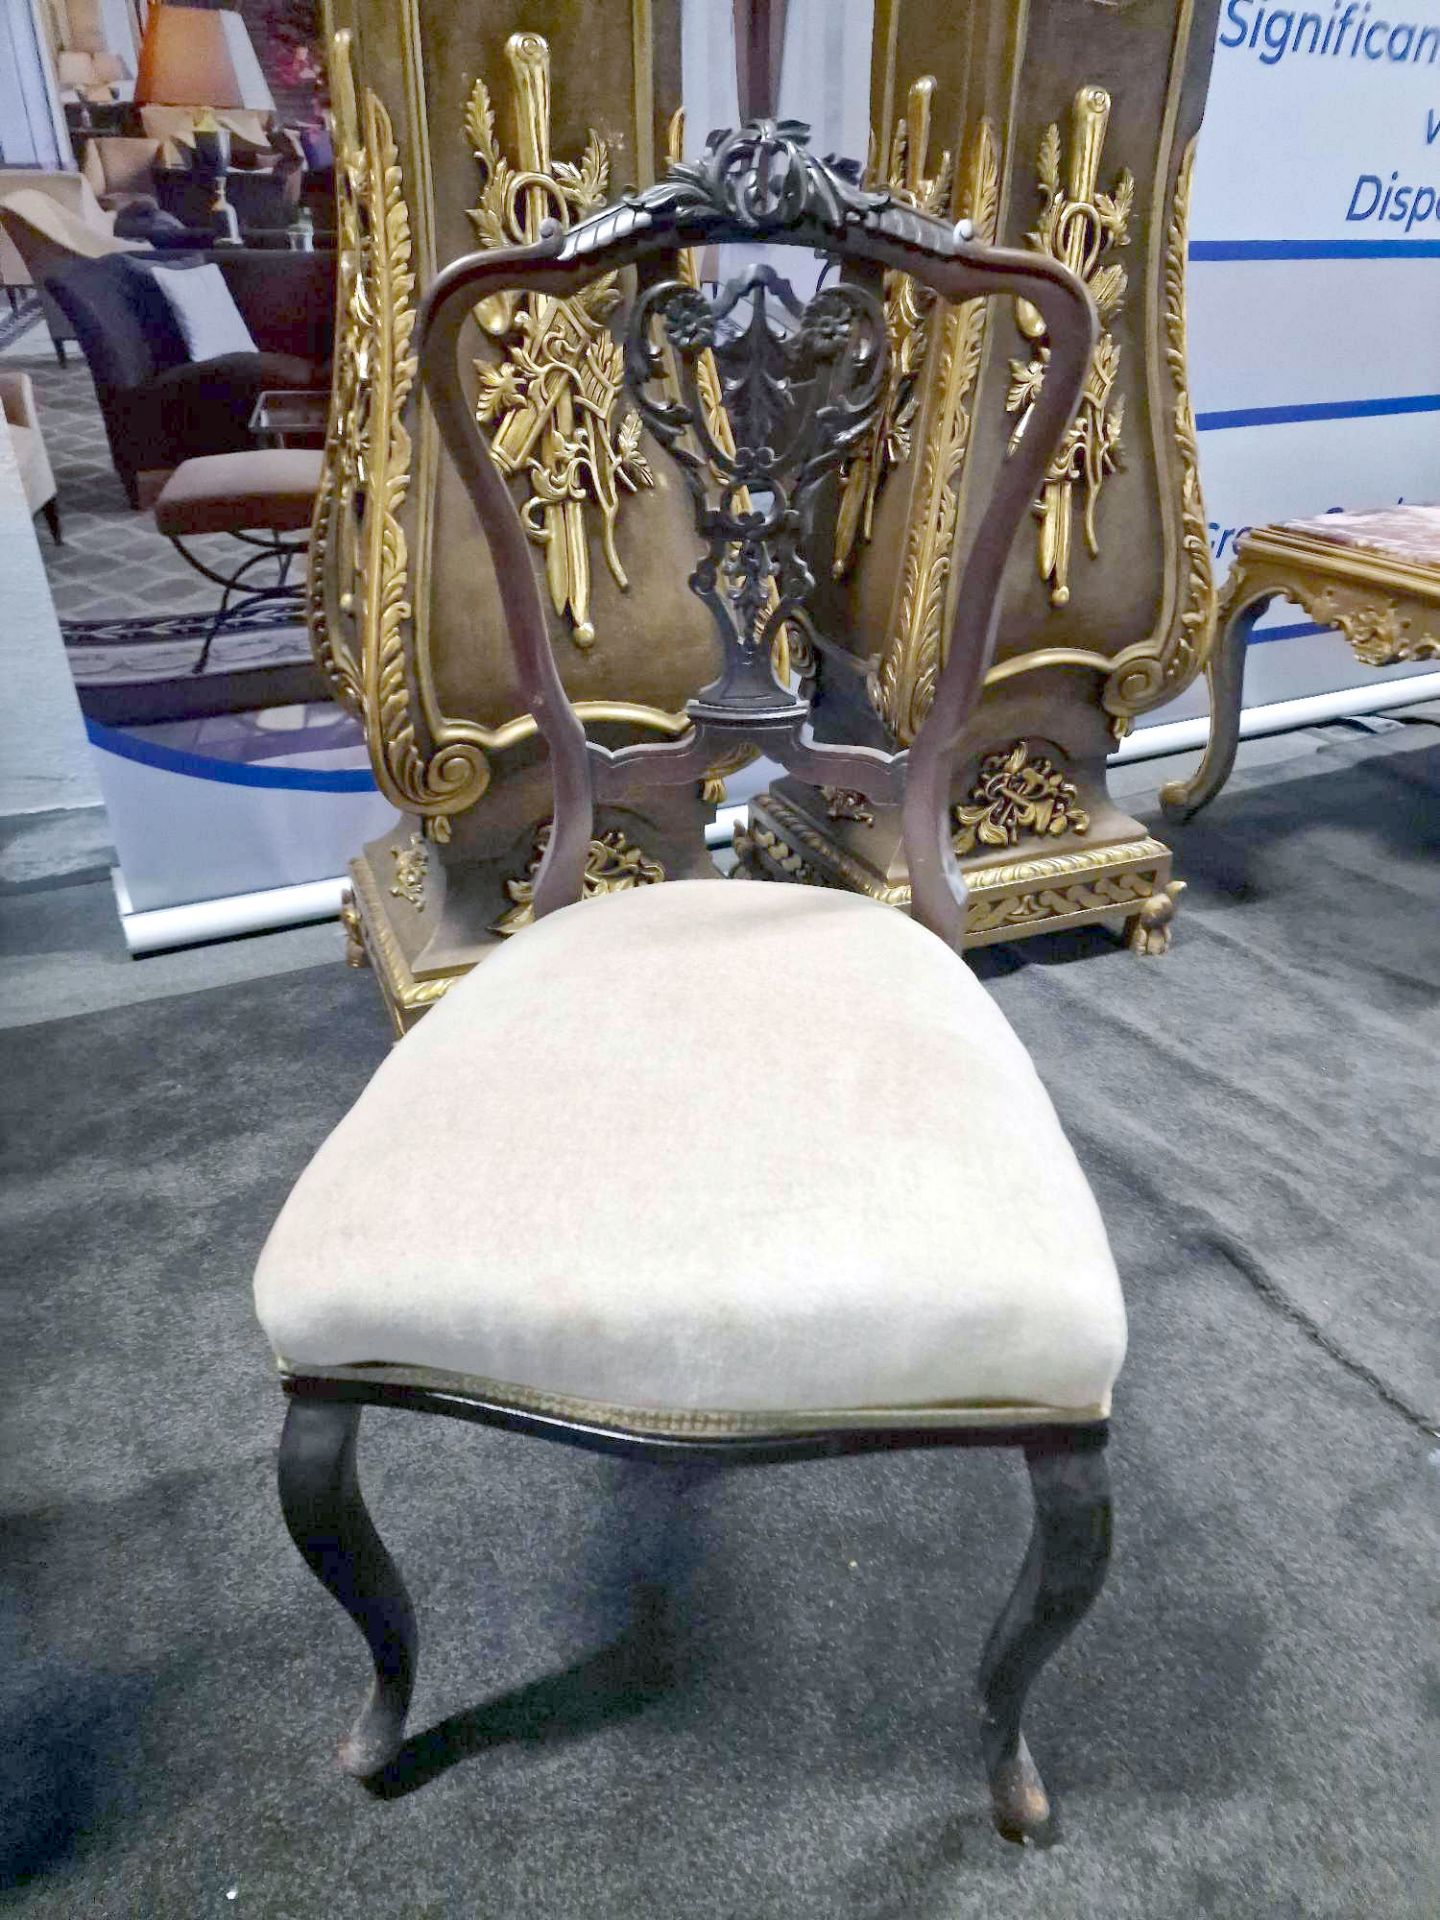 An Elegant Set of 4 Victorian Dining Chairs Elaborately Carved Top Rail And Shield Backs The Seats - Image 9 of 17